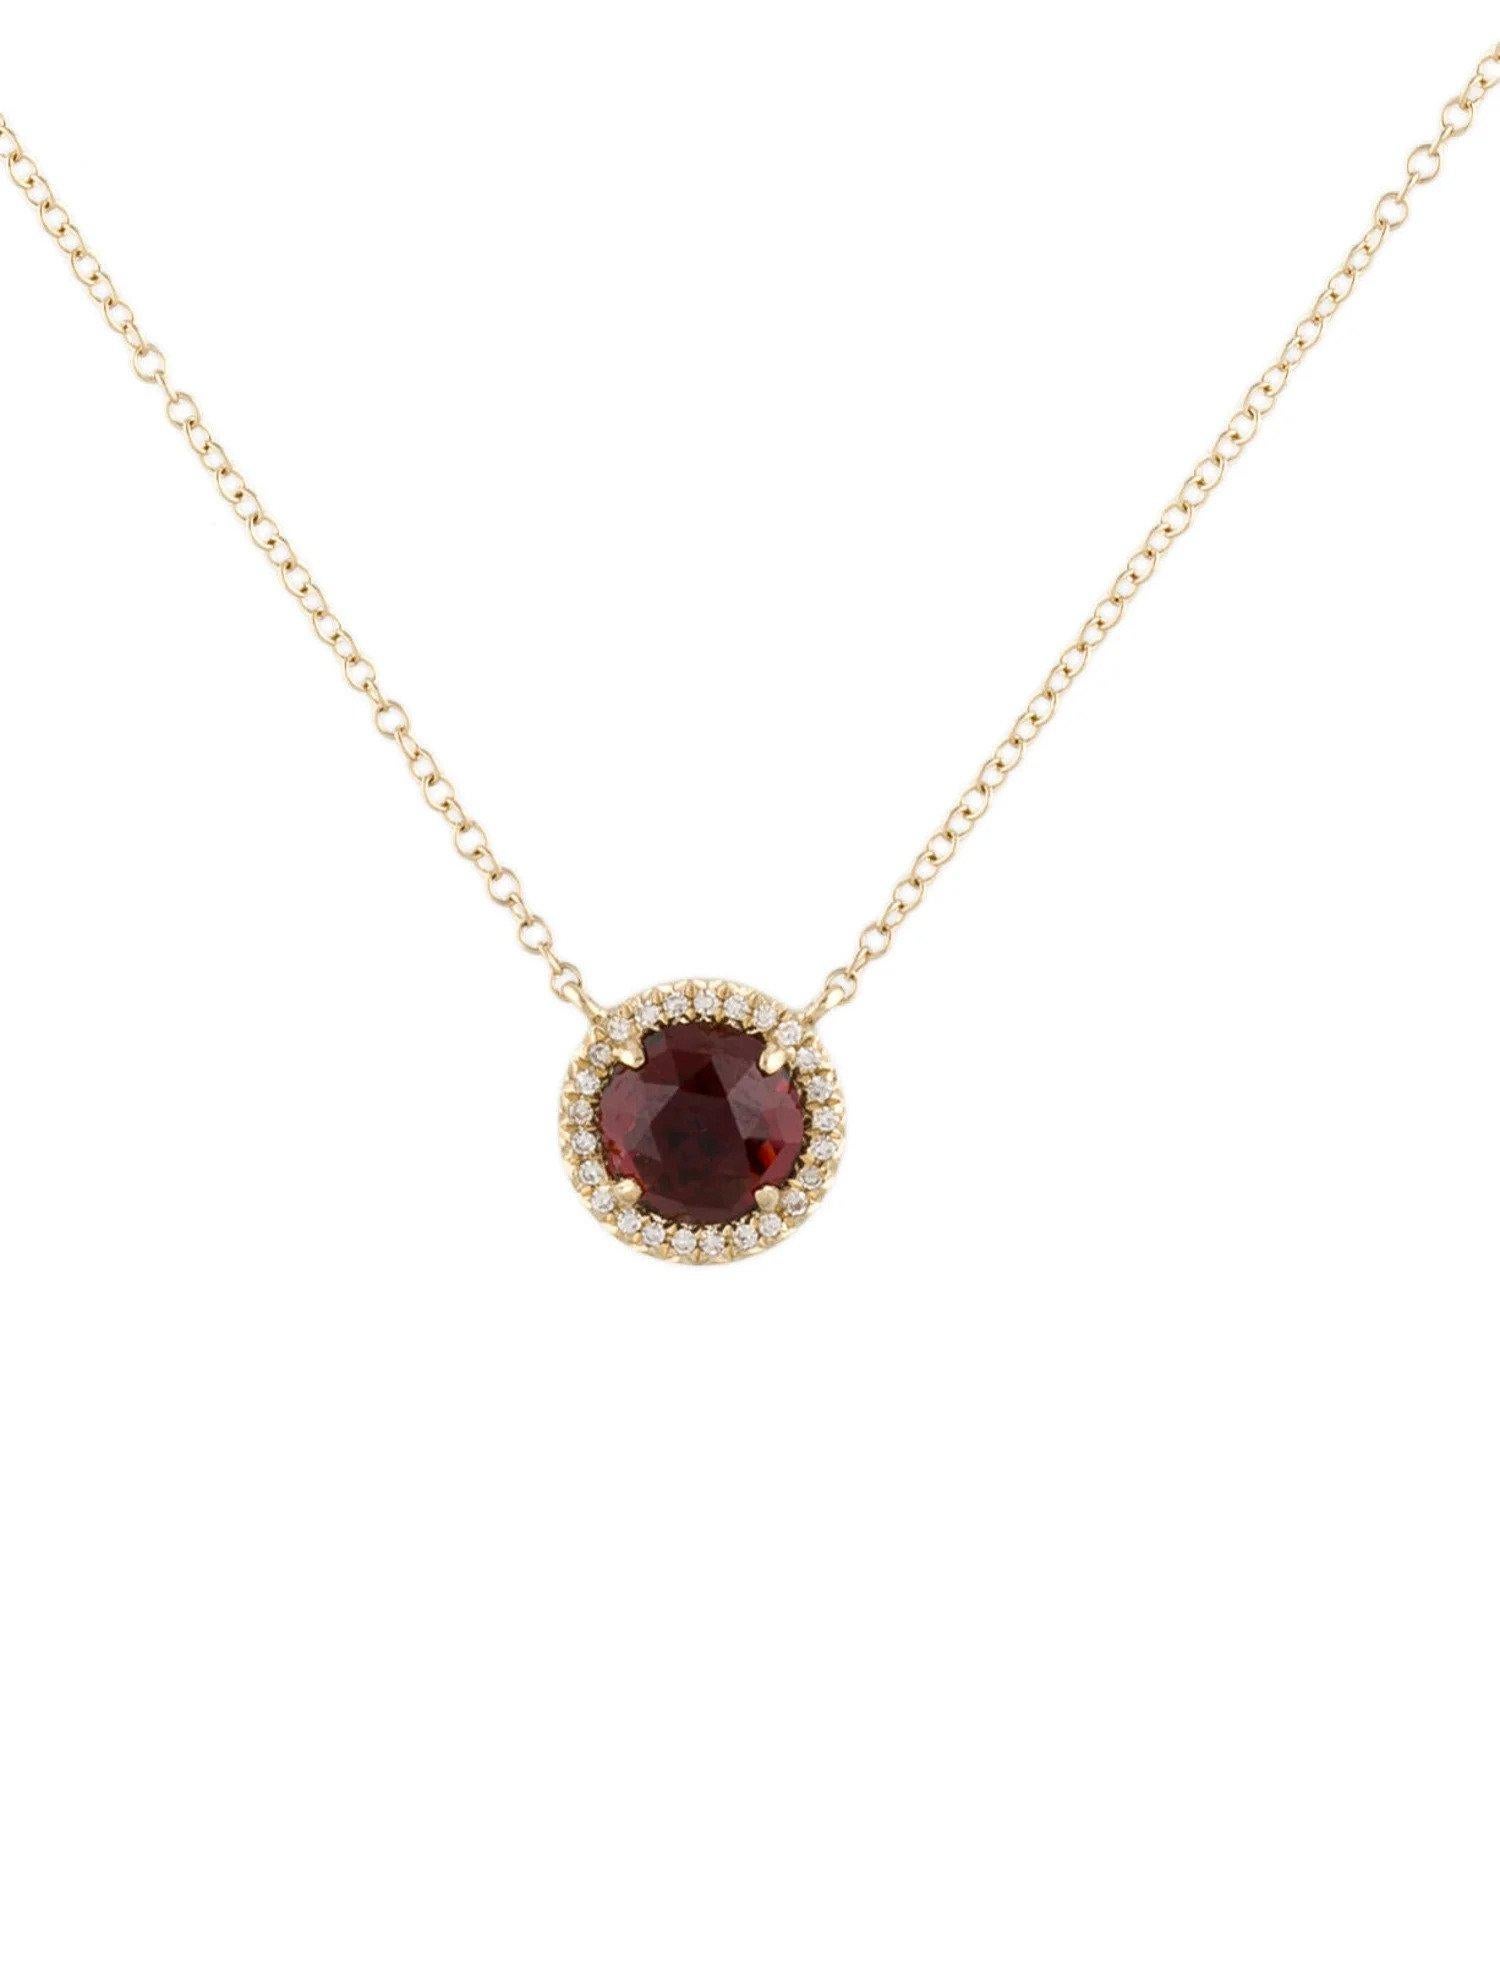 This Garnet & Diamond Pendant is a stunning and timeless accessory that can add a touch of glamour and sophistication to any outfit. 

This pendant features a 1.48 Carat Round Garnet, with a Diamond Halo comprised of 0.06 Carats of Single Cut Round